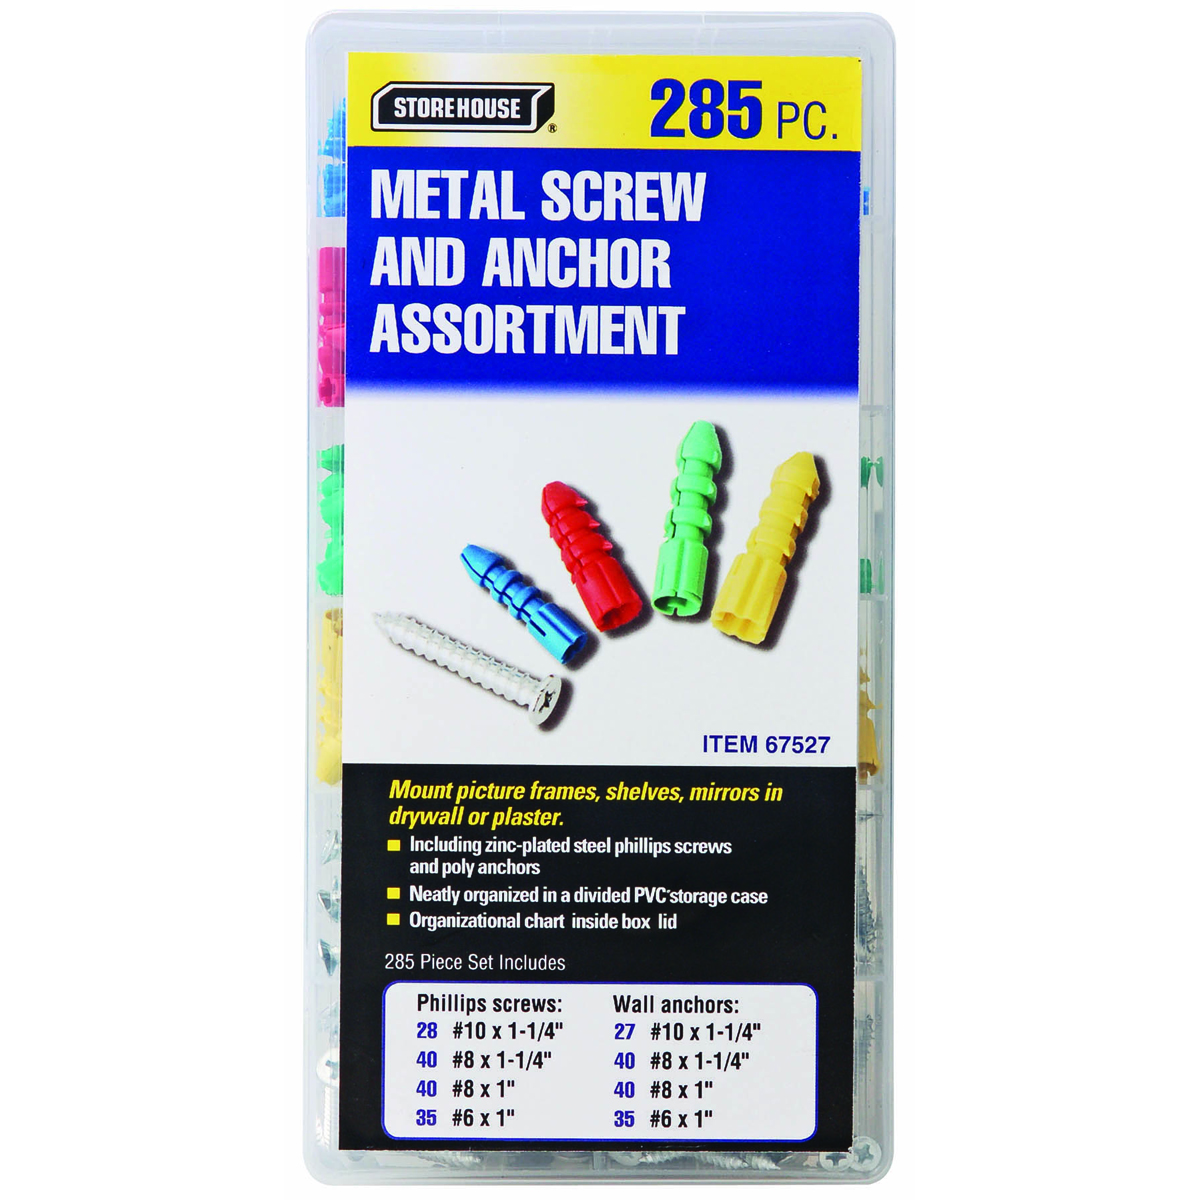 STOREHOUSE Metal Screw and Anchor Assortment Set 285 Pc. - Item 67527